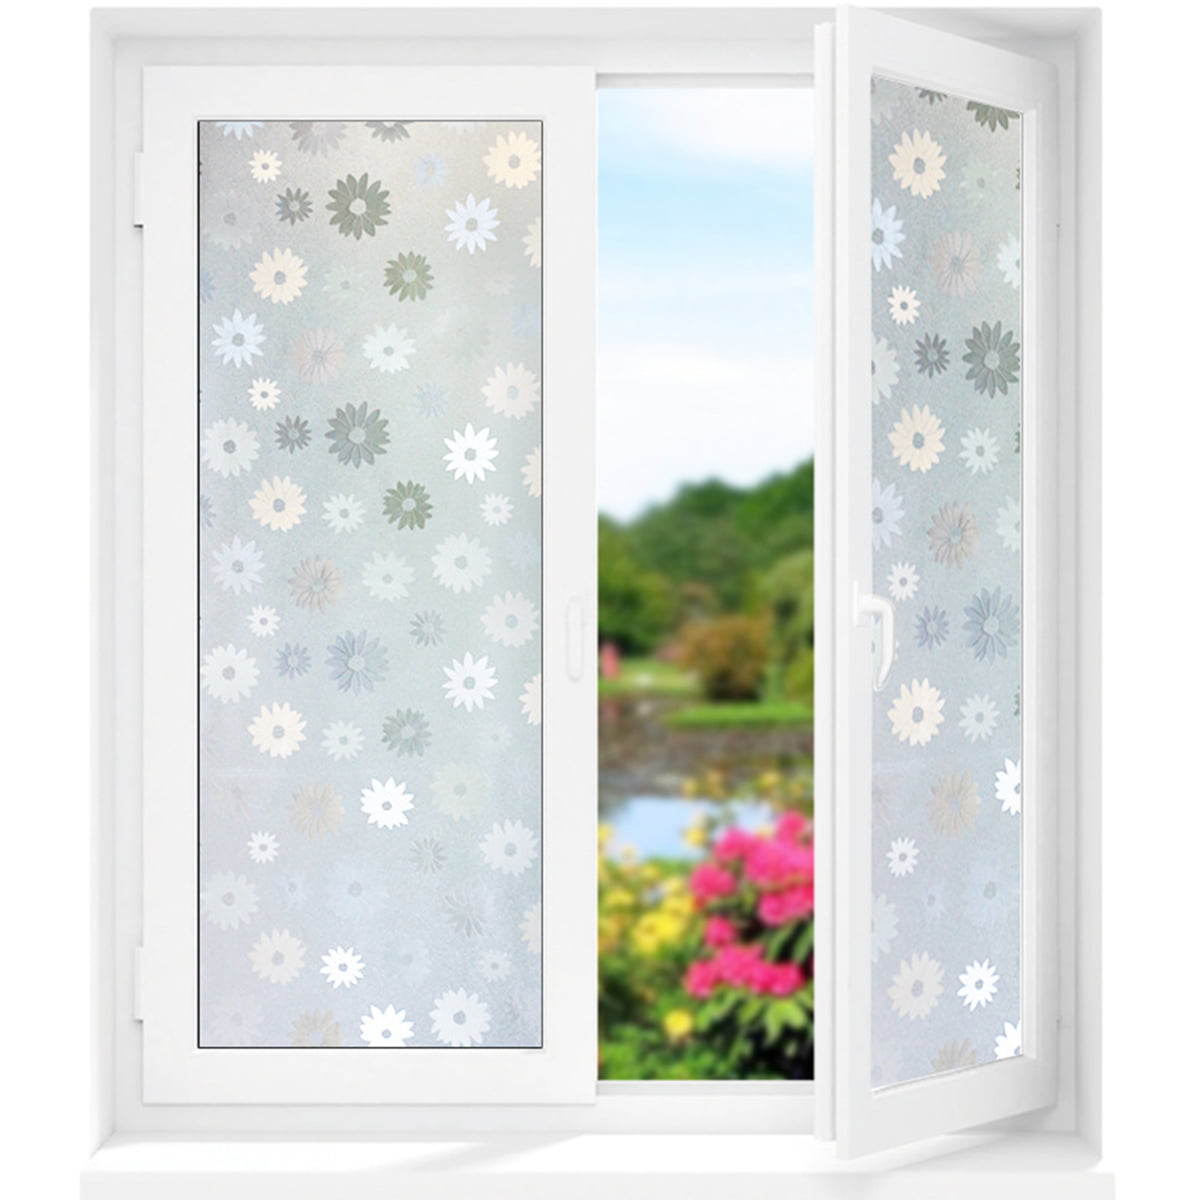 Window Film Privacy Decoration Heat Control Window Tint for Home Static Clings Glass Coverings UV Blocking White Frosted Moroccan Line 17.5 Inch x 6.5 Feet